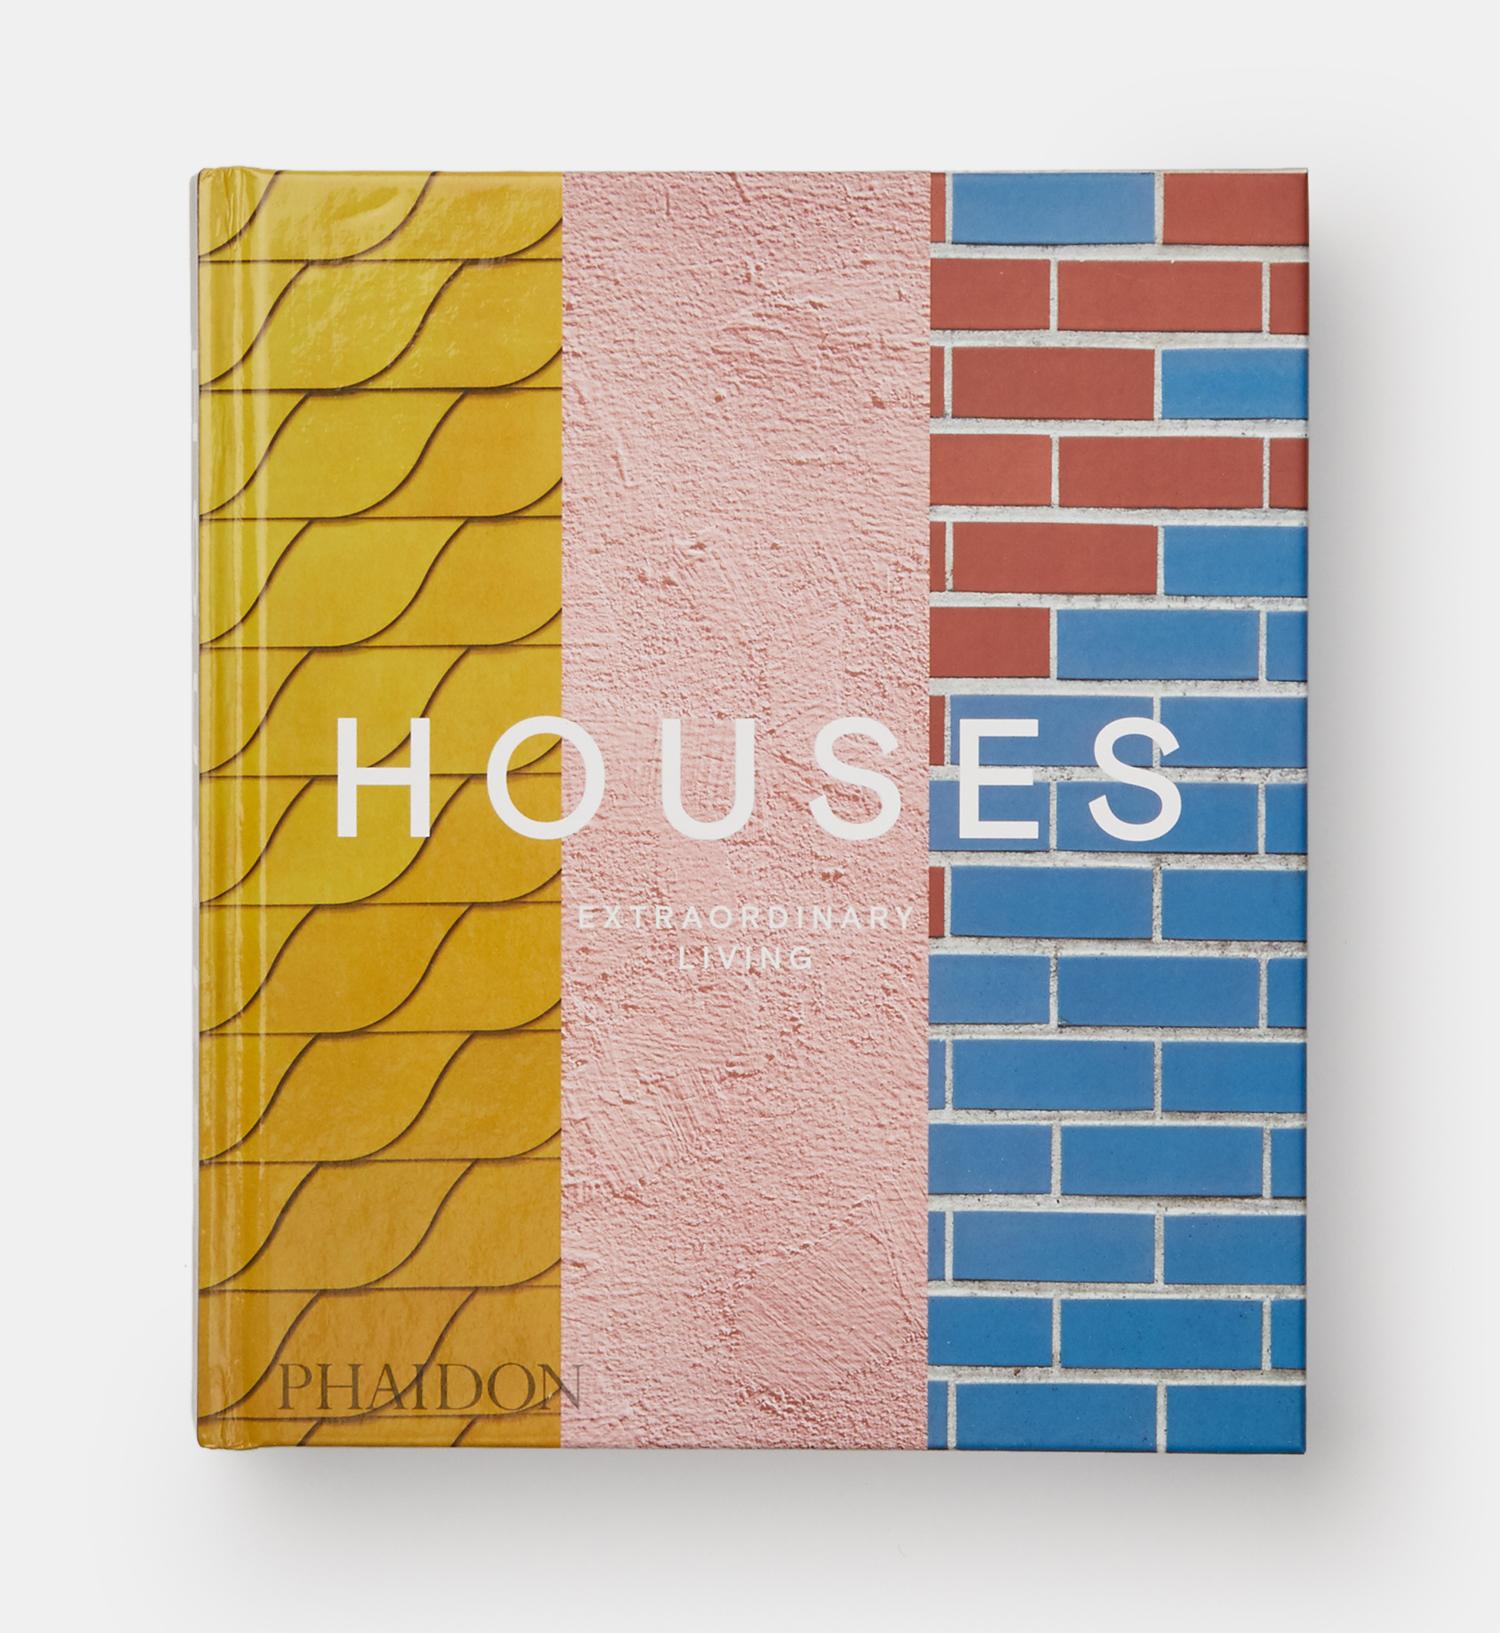 Explore 400 of the world's most innovative and influential architect-designed houses created since the early 20th century
Throughout history, houses have presented architects the world over with infinite opportunities to experiment with new methods